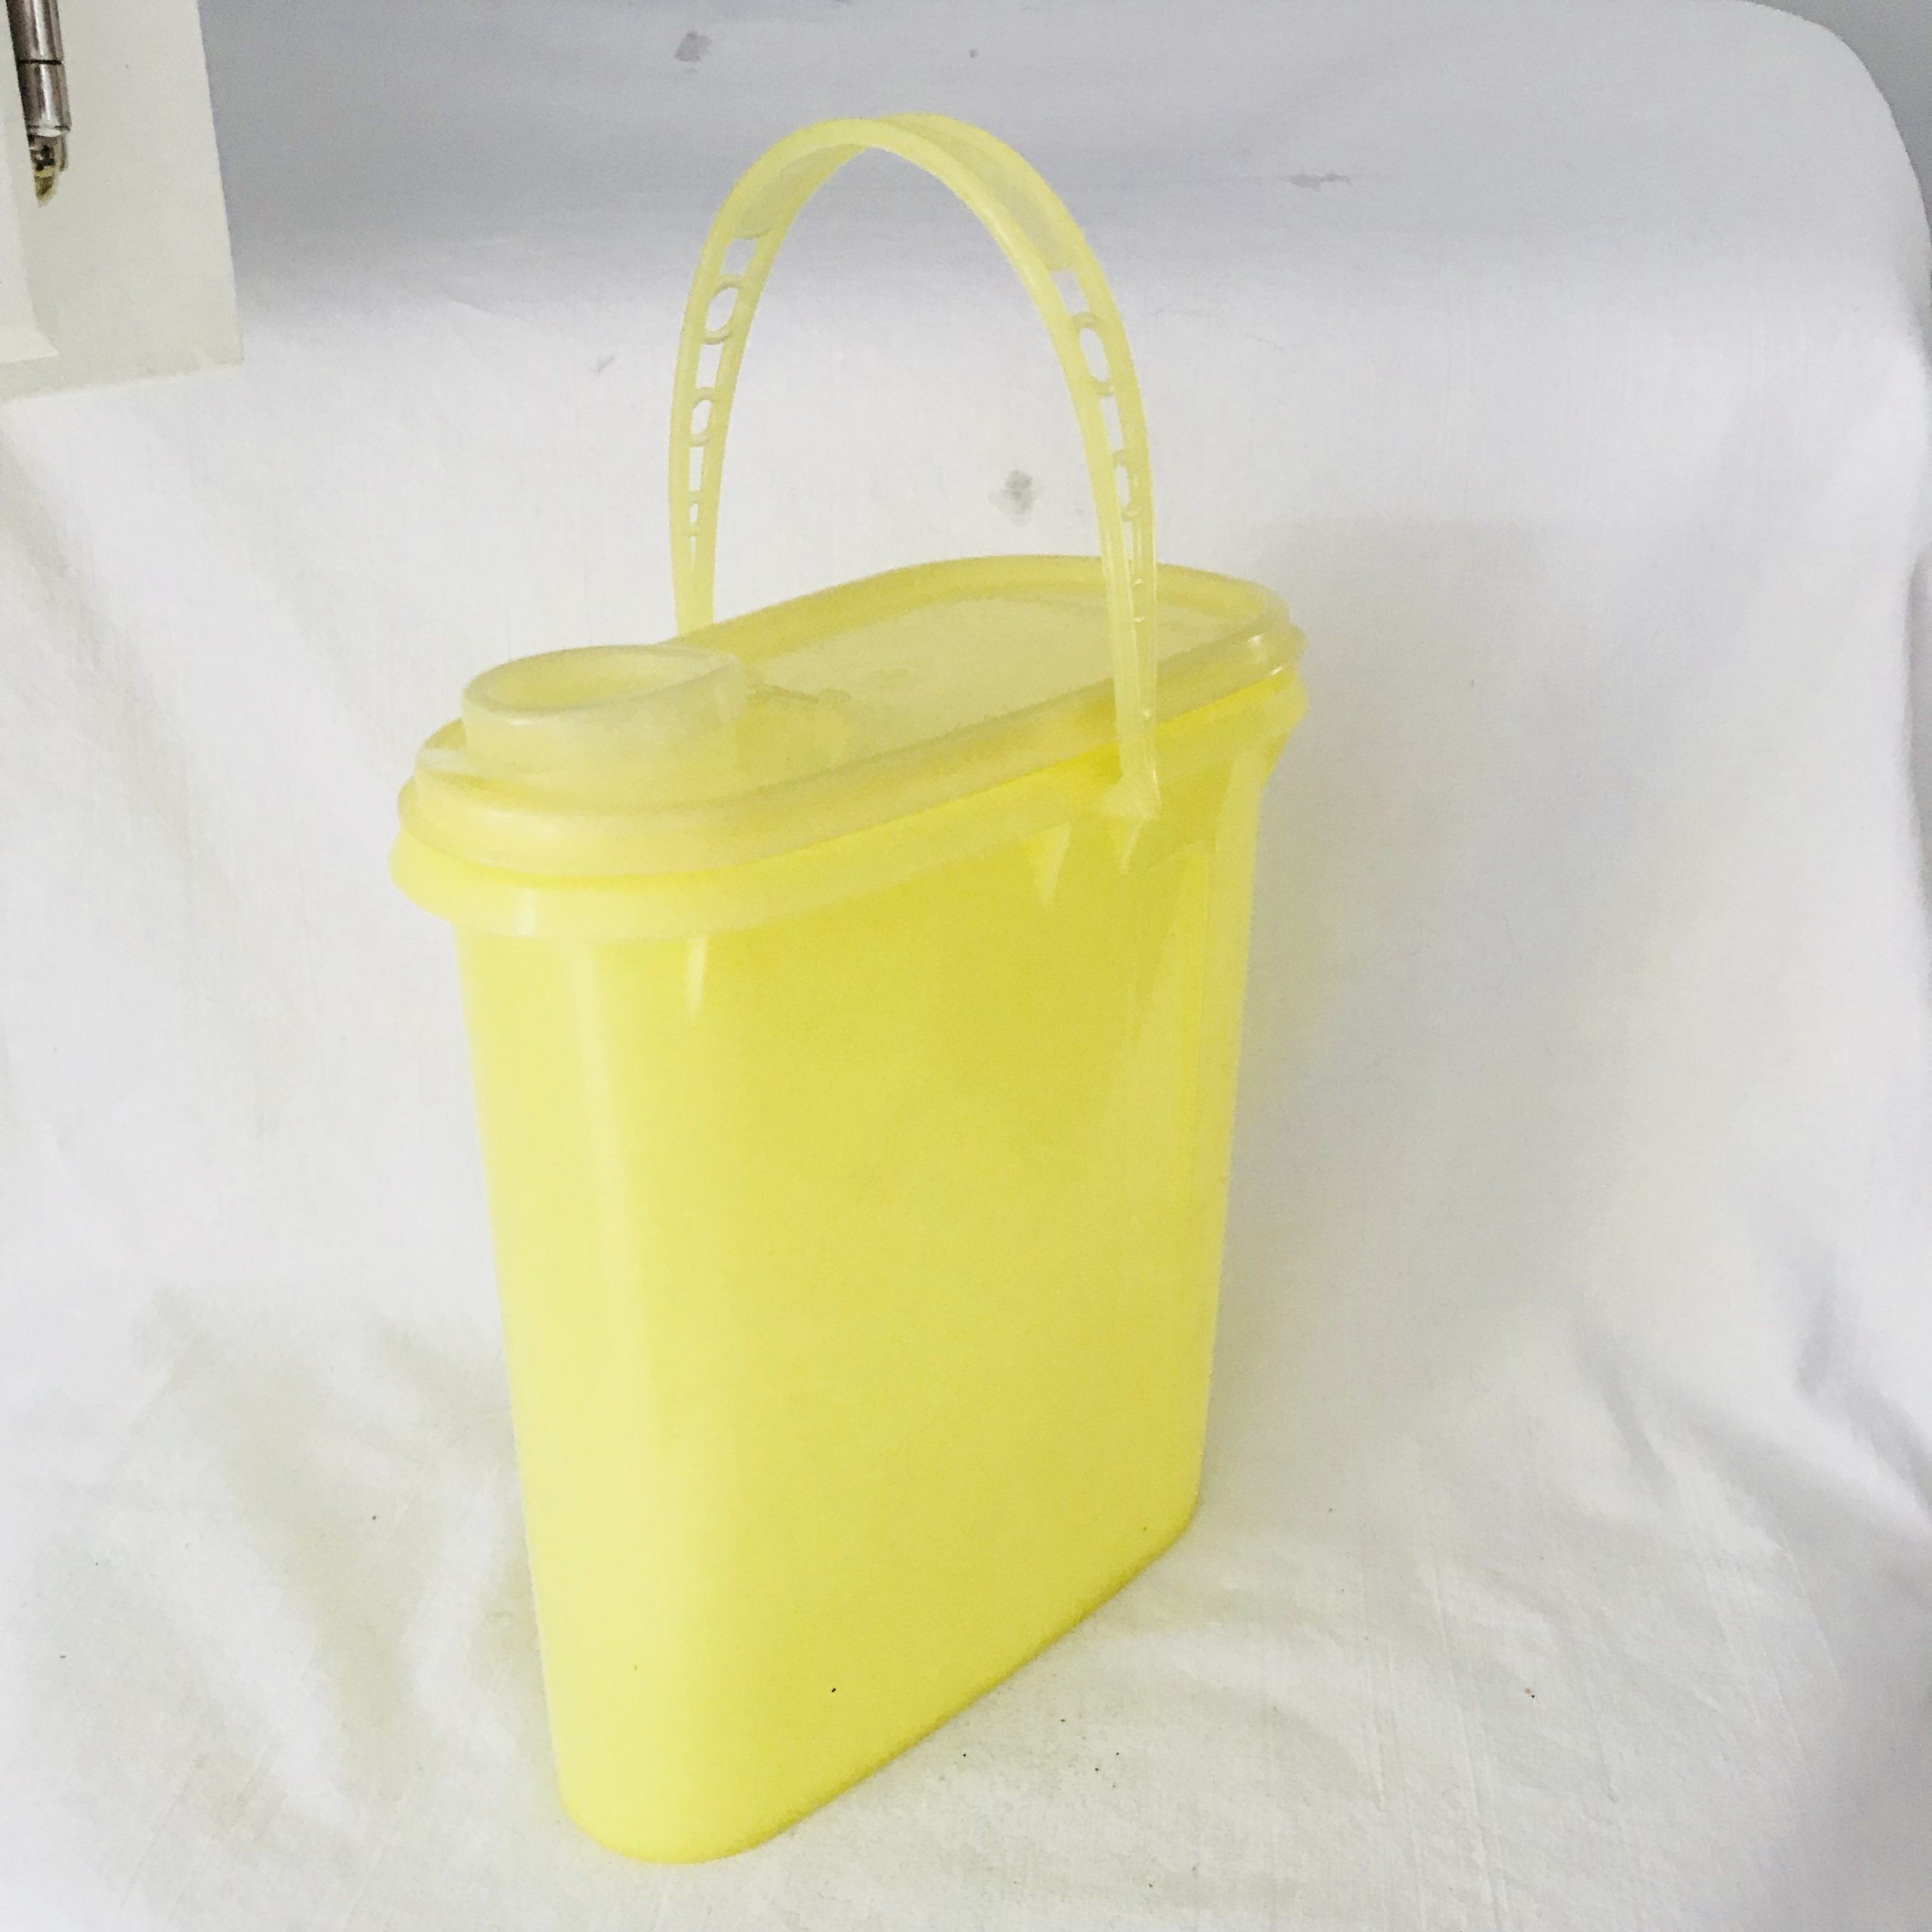 https://www.truevintageantiques.com/wp-content/uploads/2019/12/vintage-tupperware-refrigerator-container-pitcher-koolaid-iced-tea-water-2-quart-buddy-pitcher-with-flip-top-picnic-summer-outdoor-patio-5e02d19c2-scaled.jpg